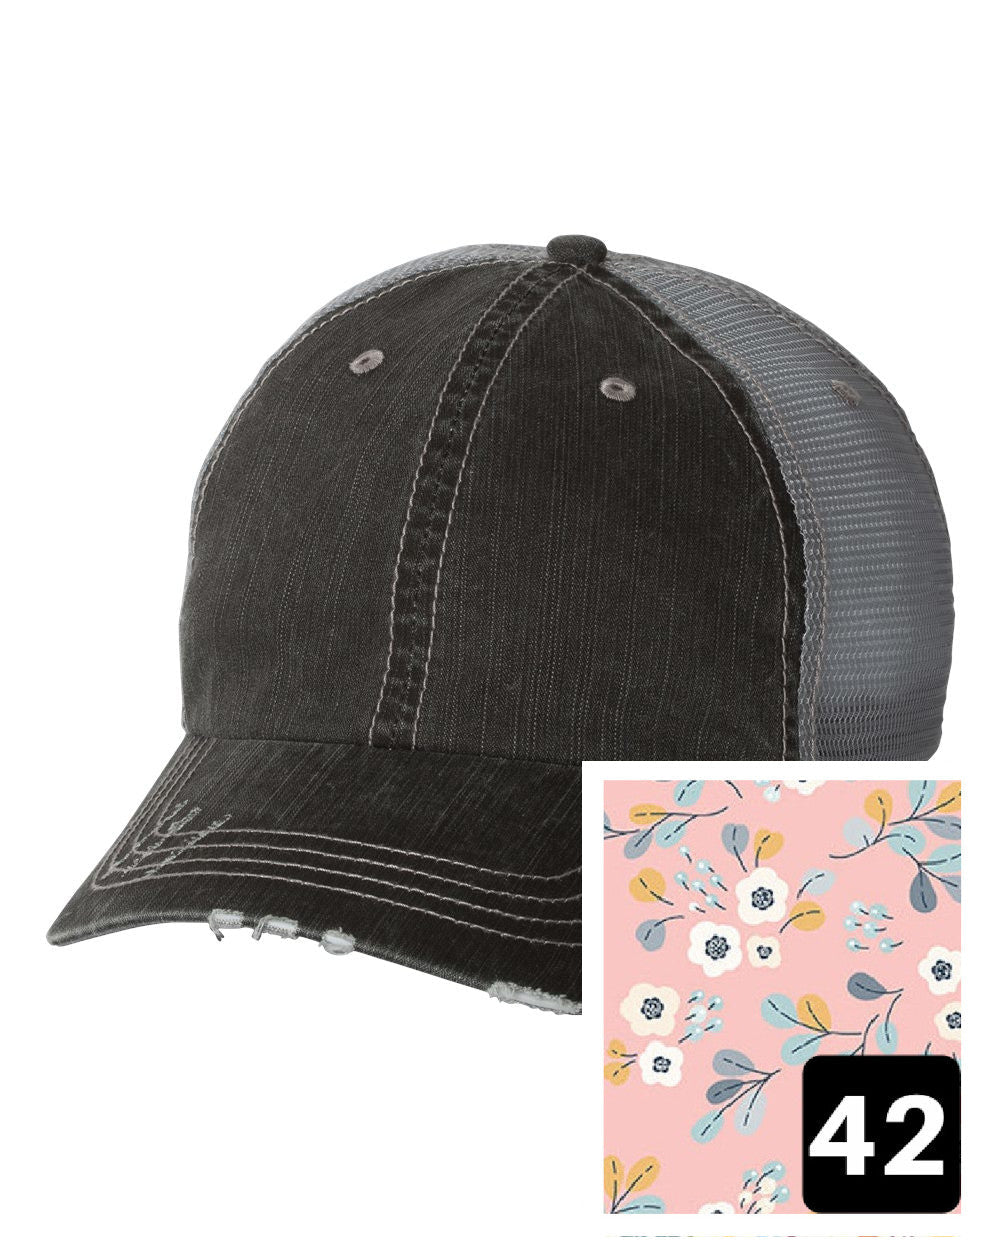 gray distressed trucker hat with light blue and pink mosaic fabric state of Mississippi